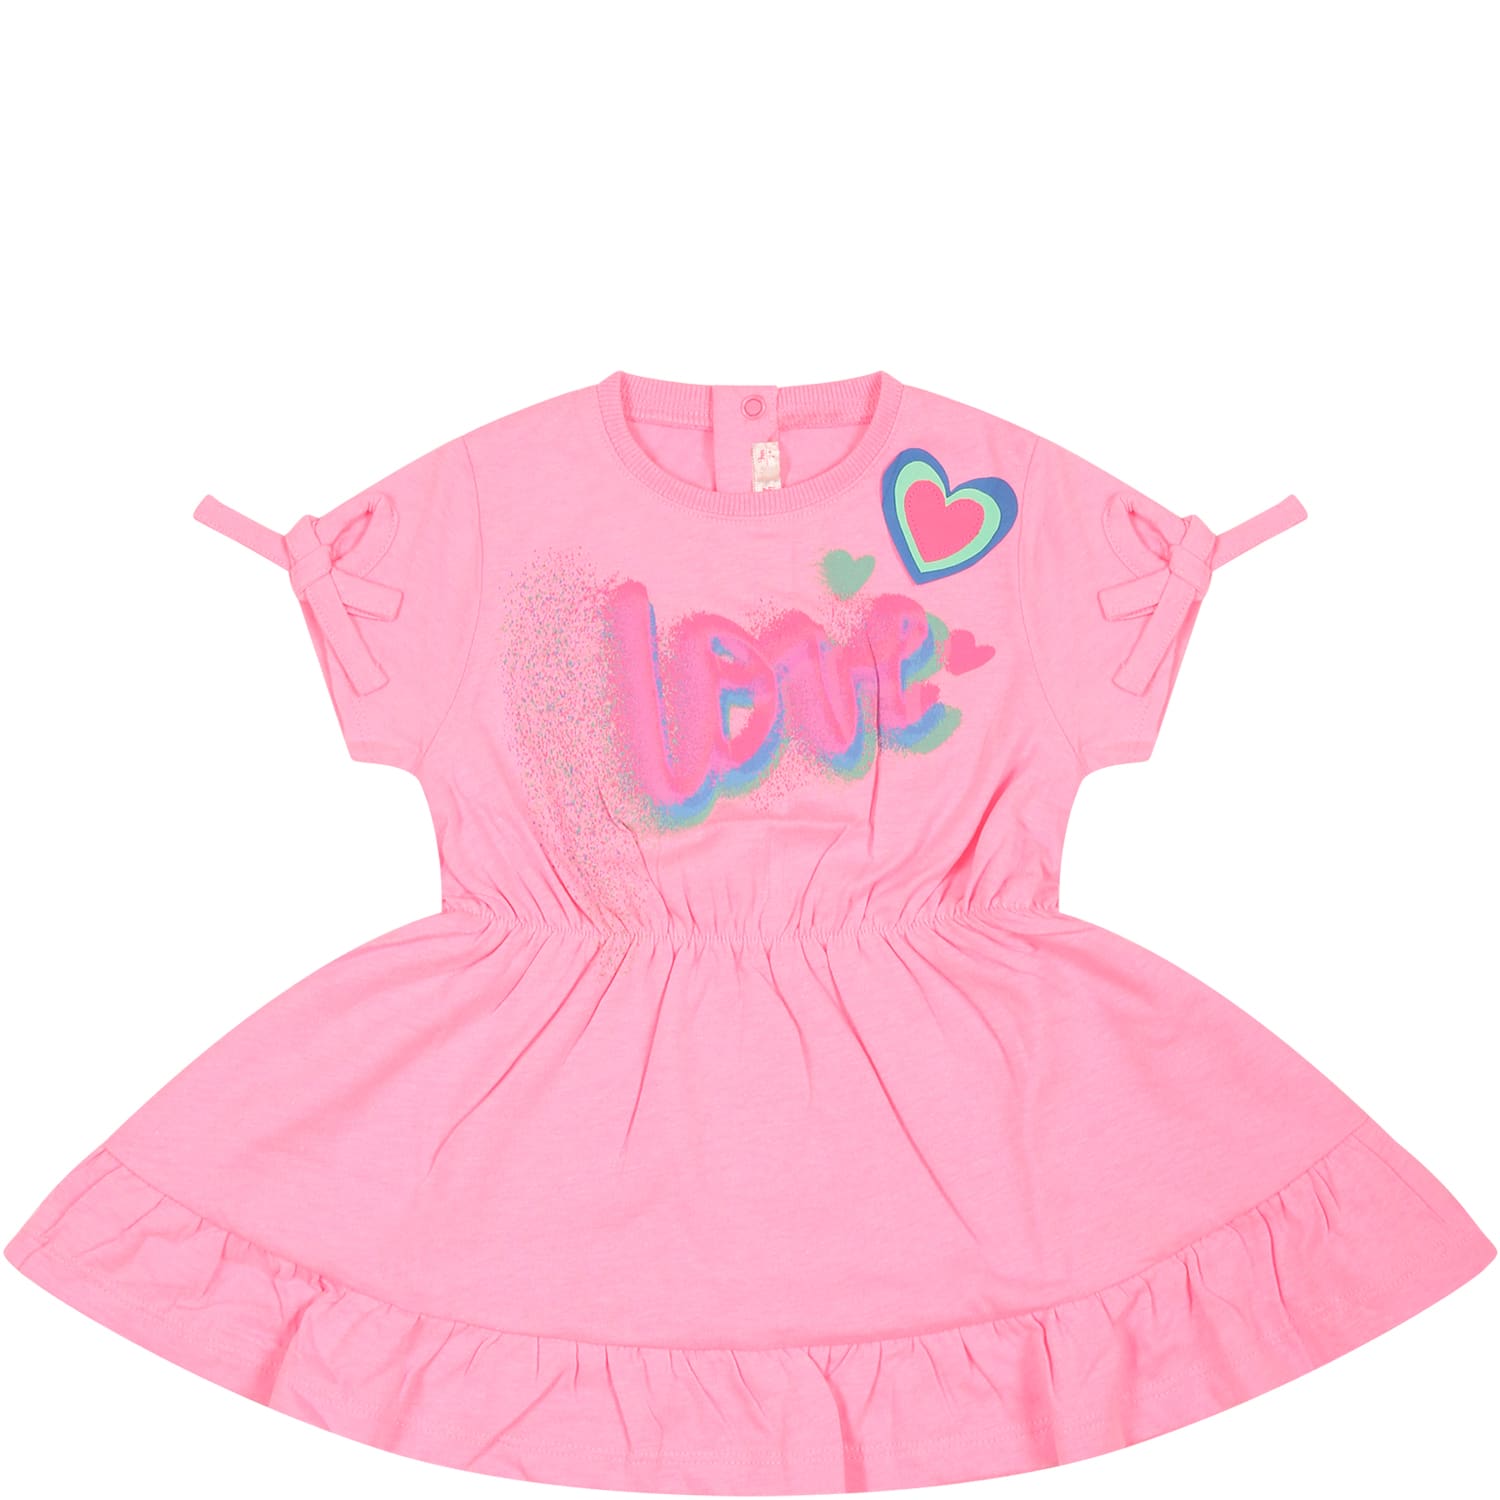 BILLIEBLUSH PINK DRESS FOR BABY GIRL WITH HEARTS